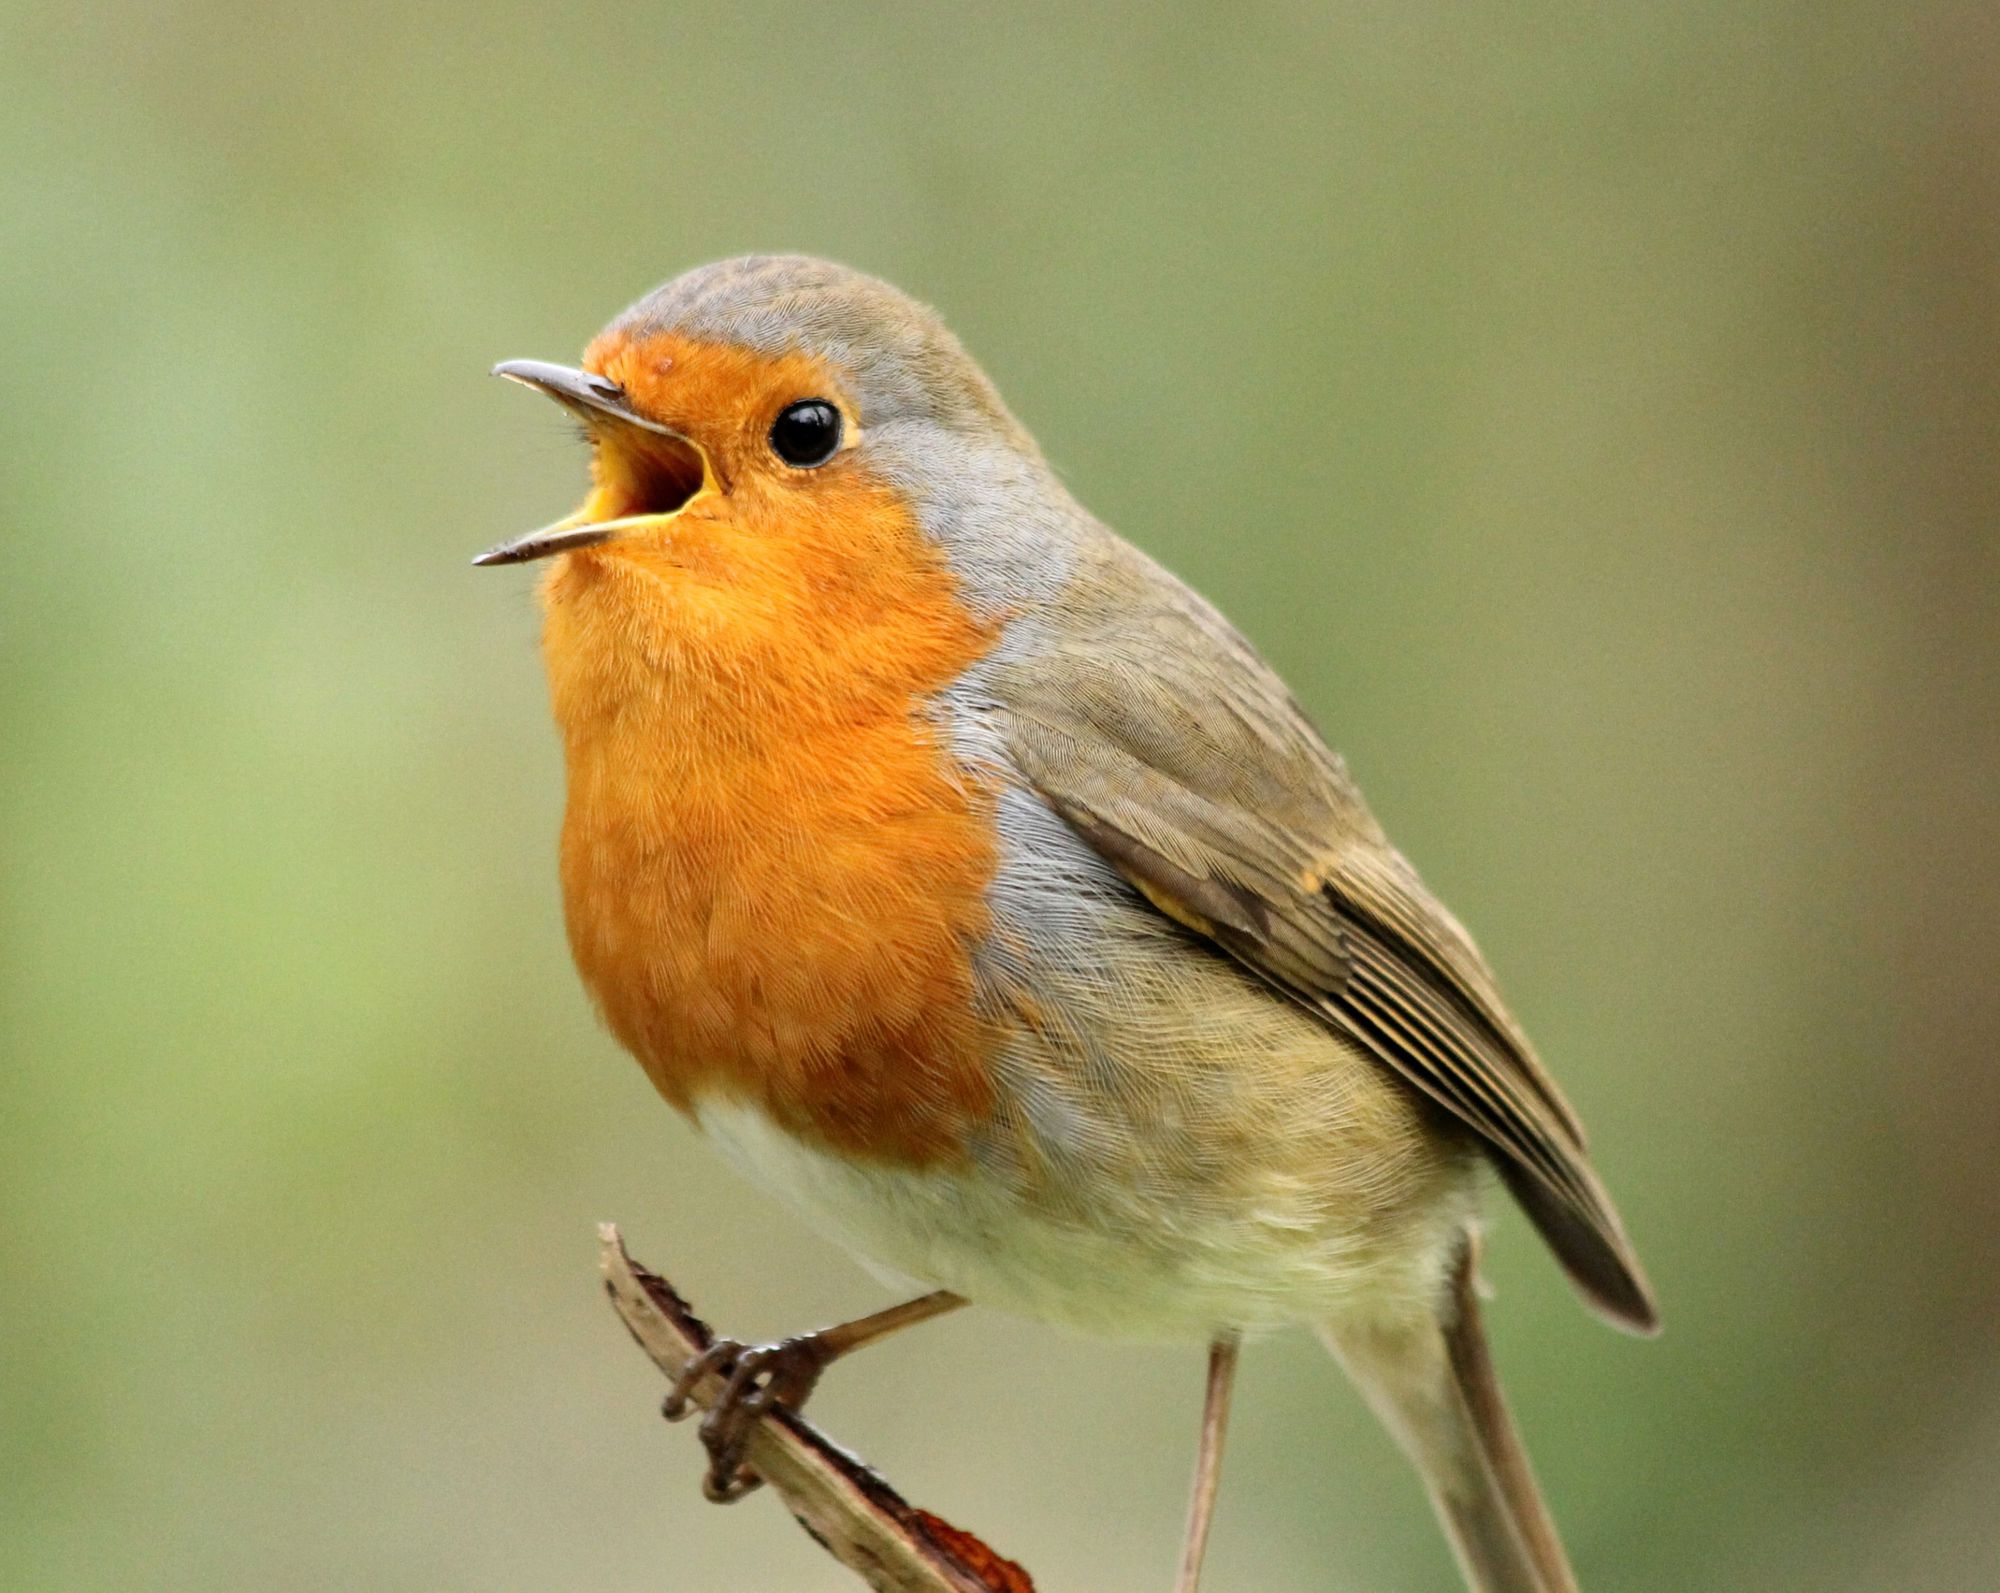 A wild robin singing on a tree branch.